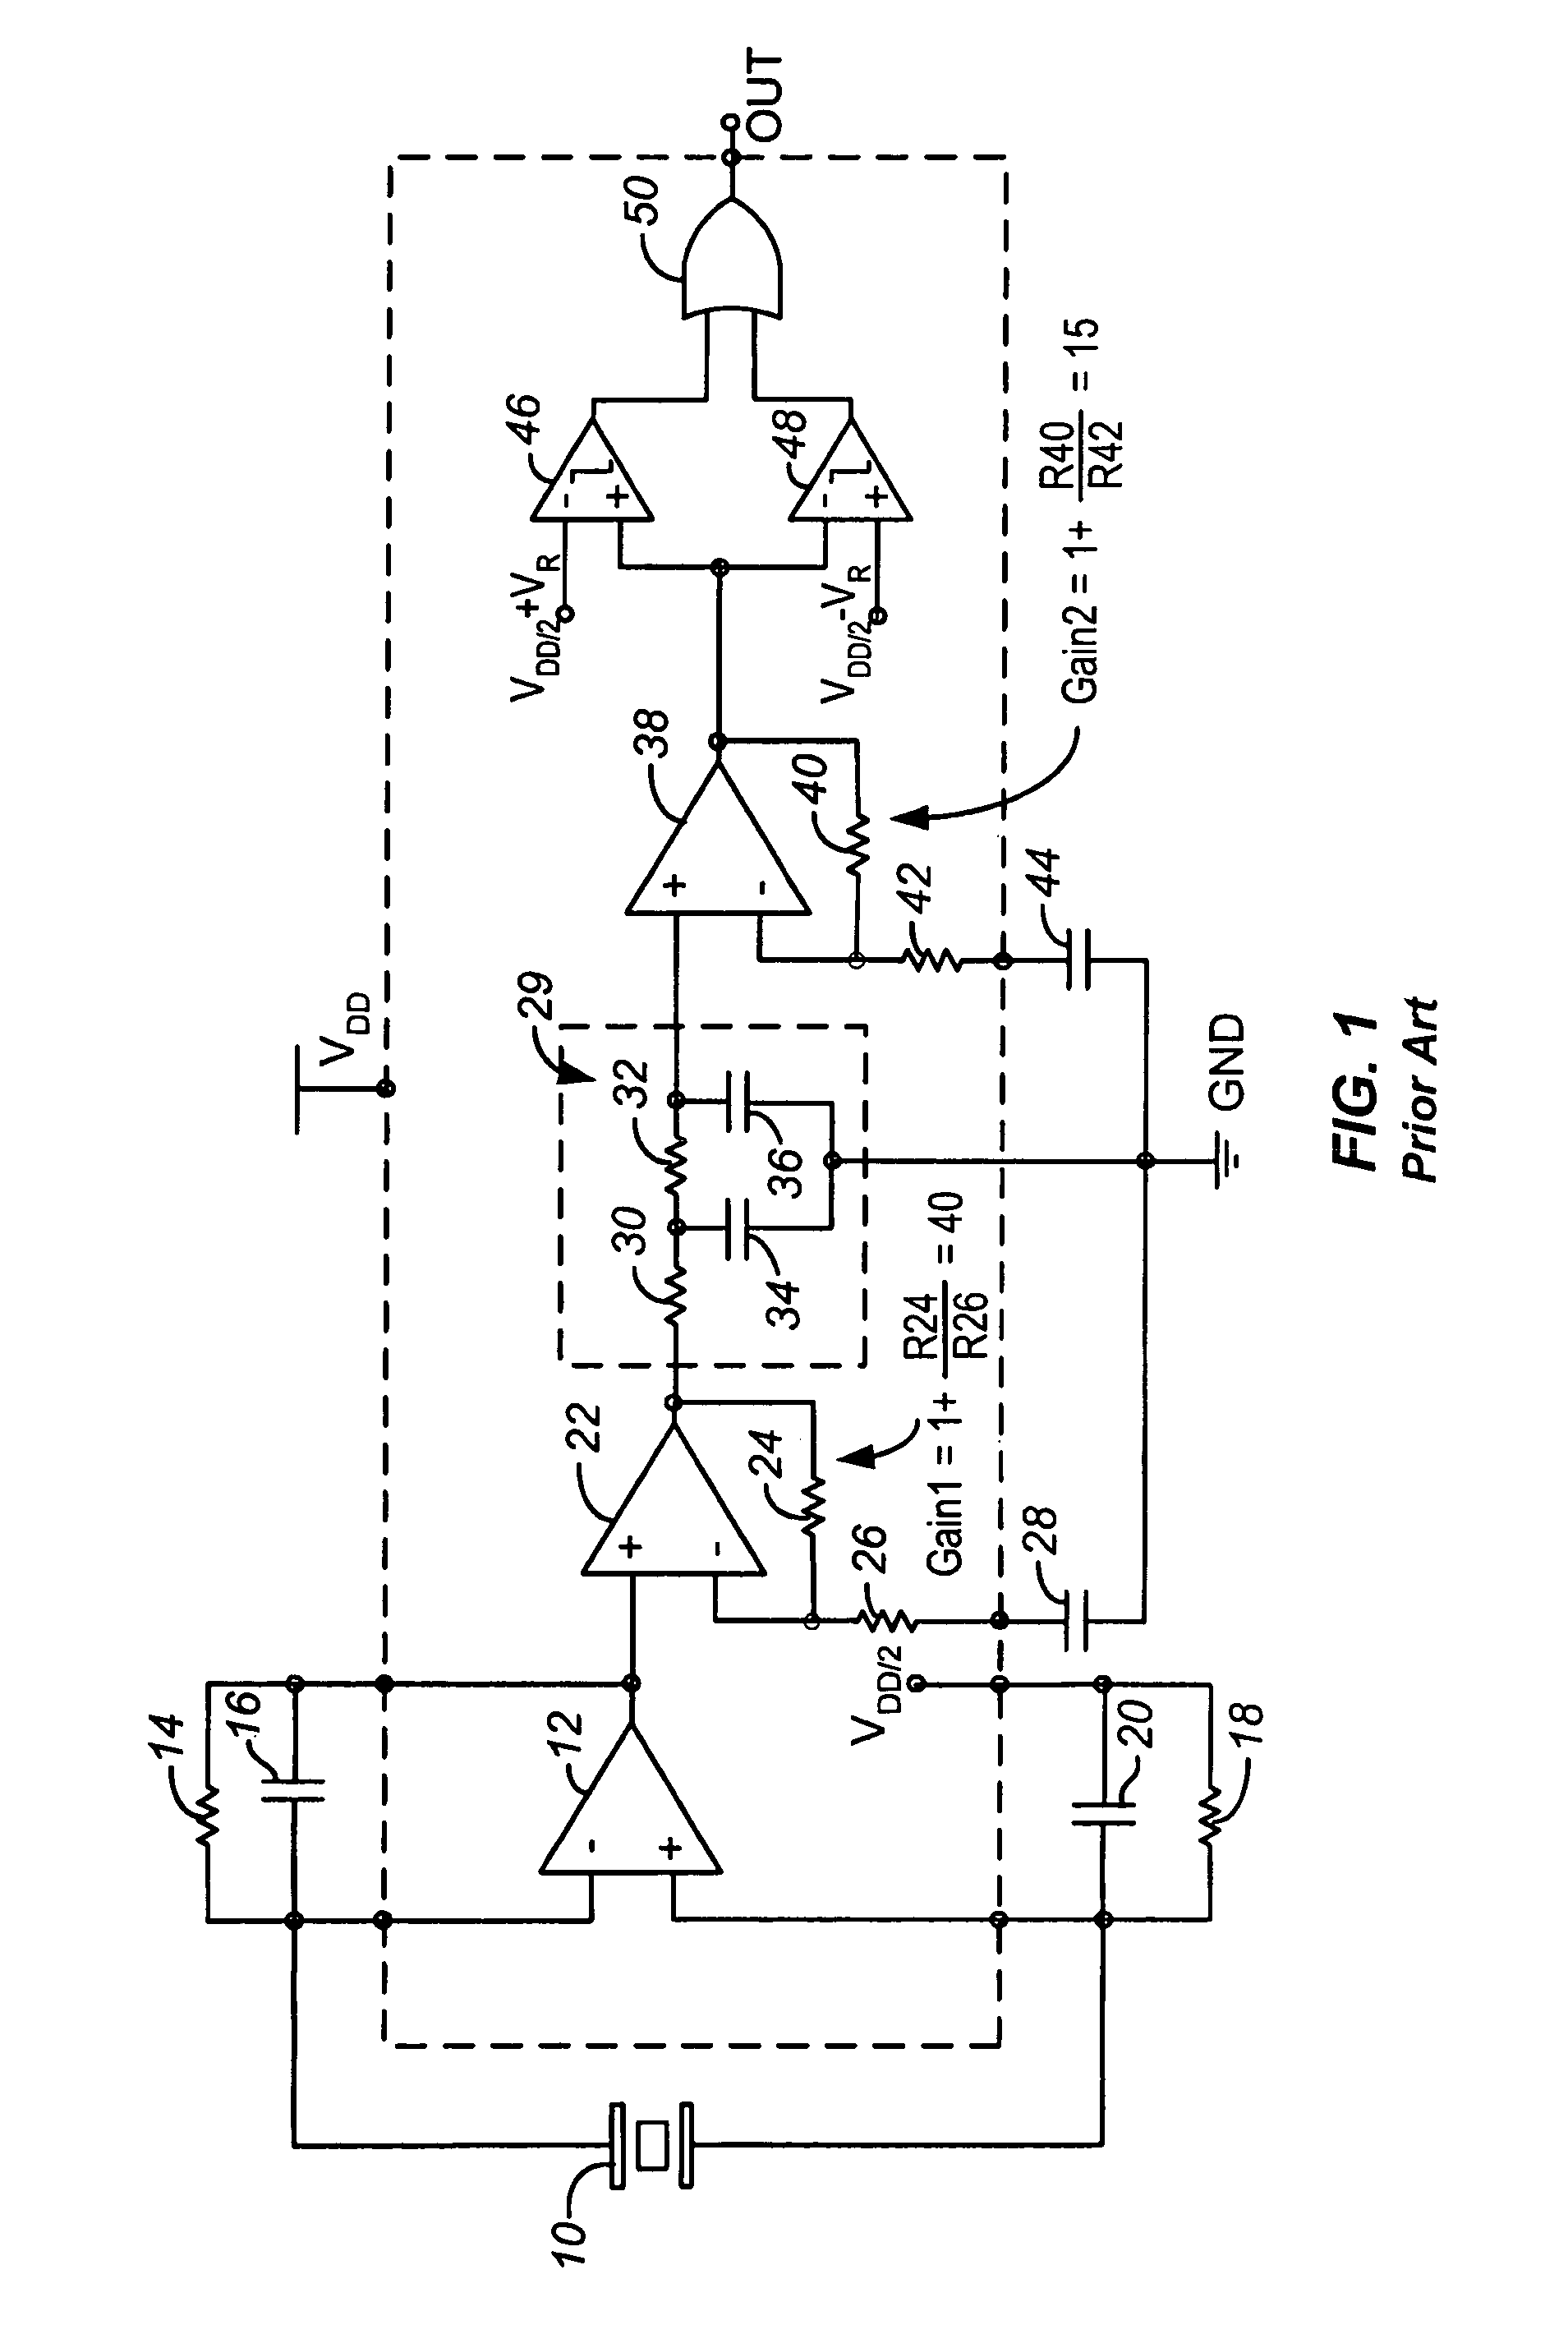 Shock detector with DC offset suppression using internal components